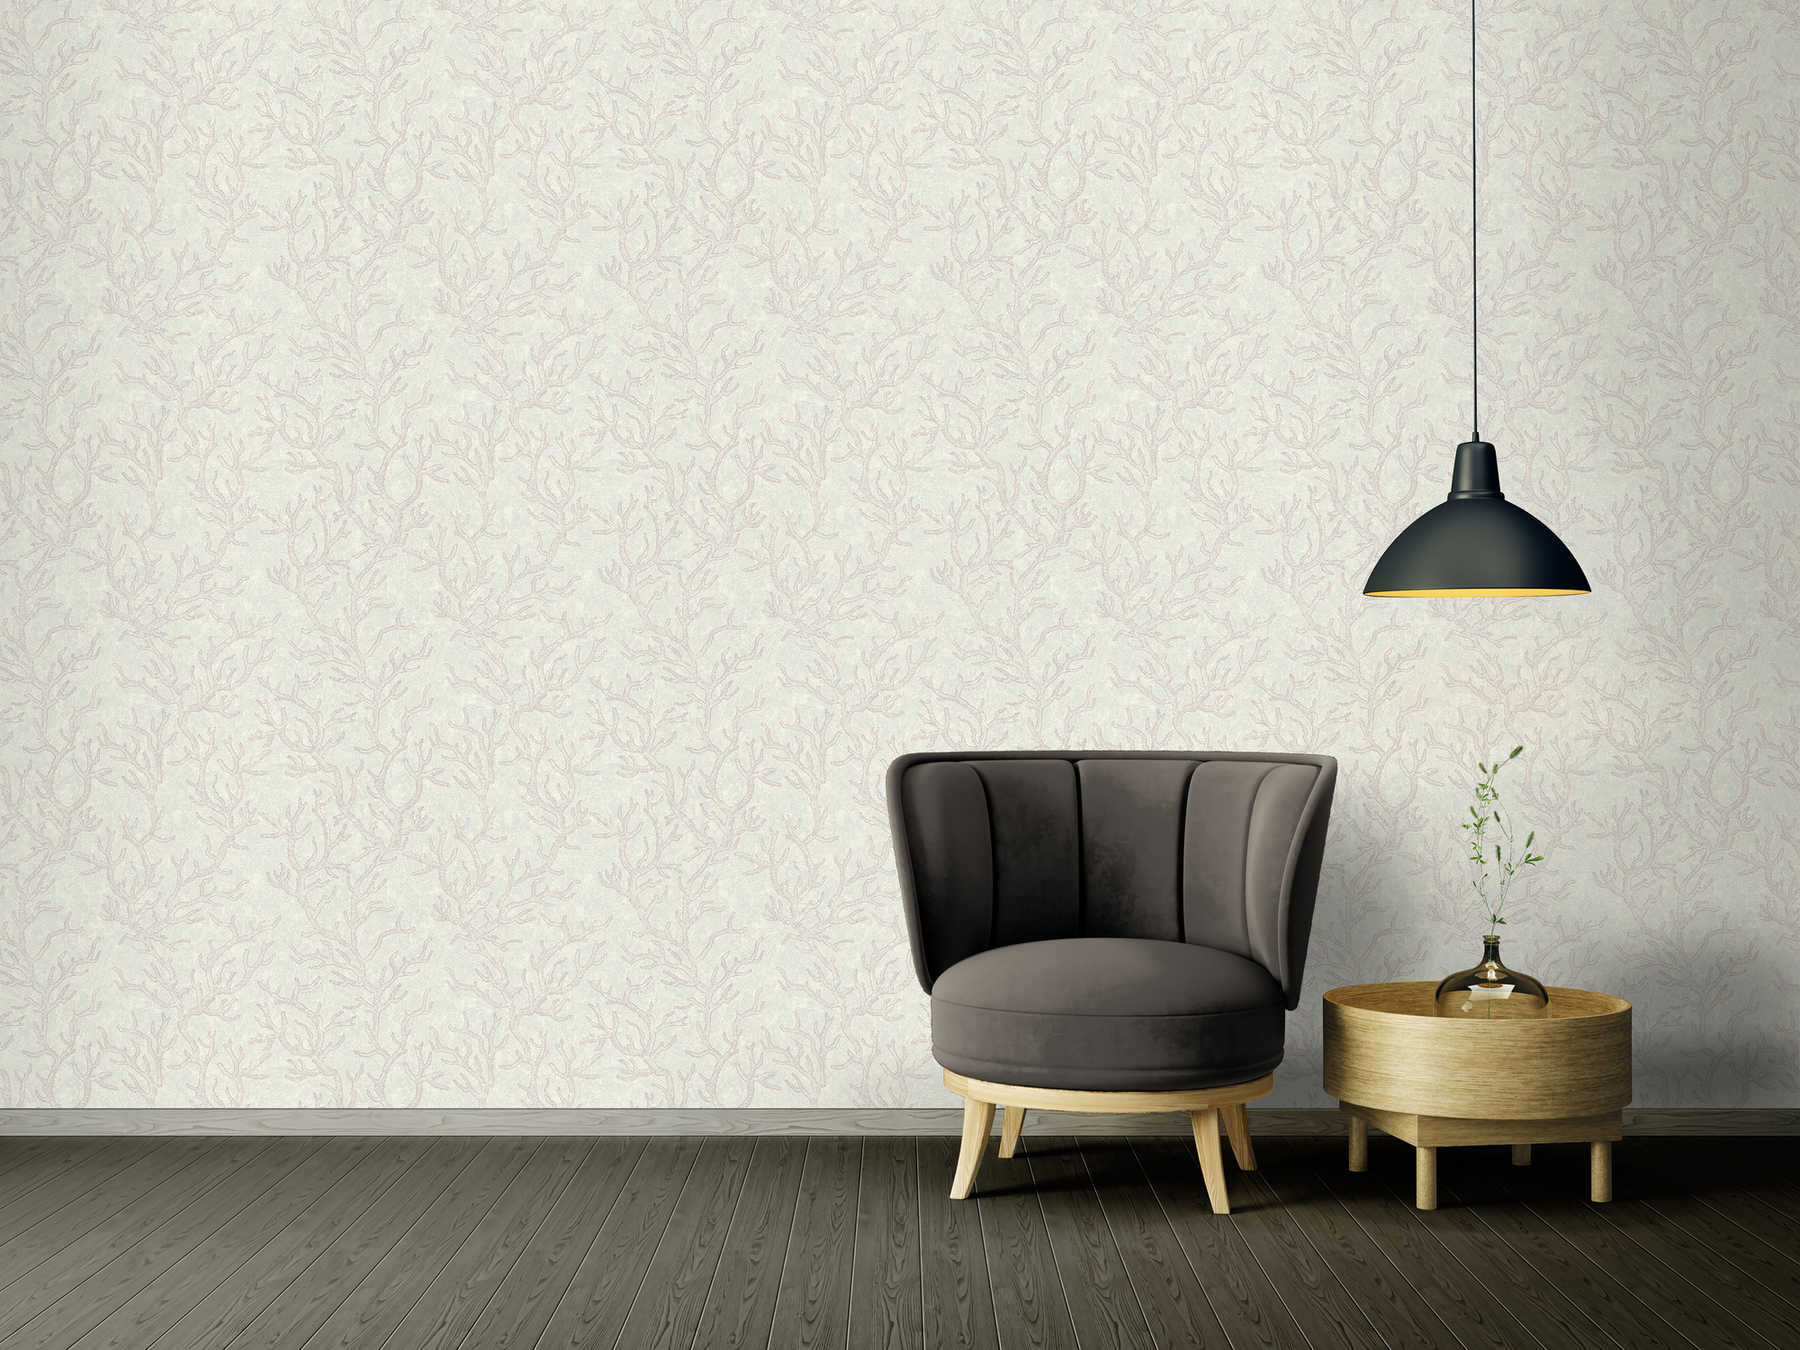             VERSACE non-woven wallpaper with coral pattern & texture design - grey, metallic
        